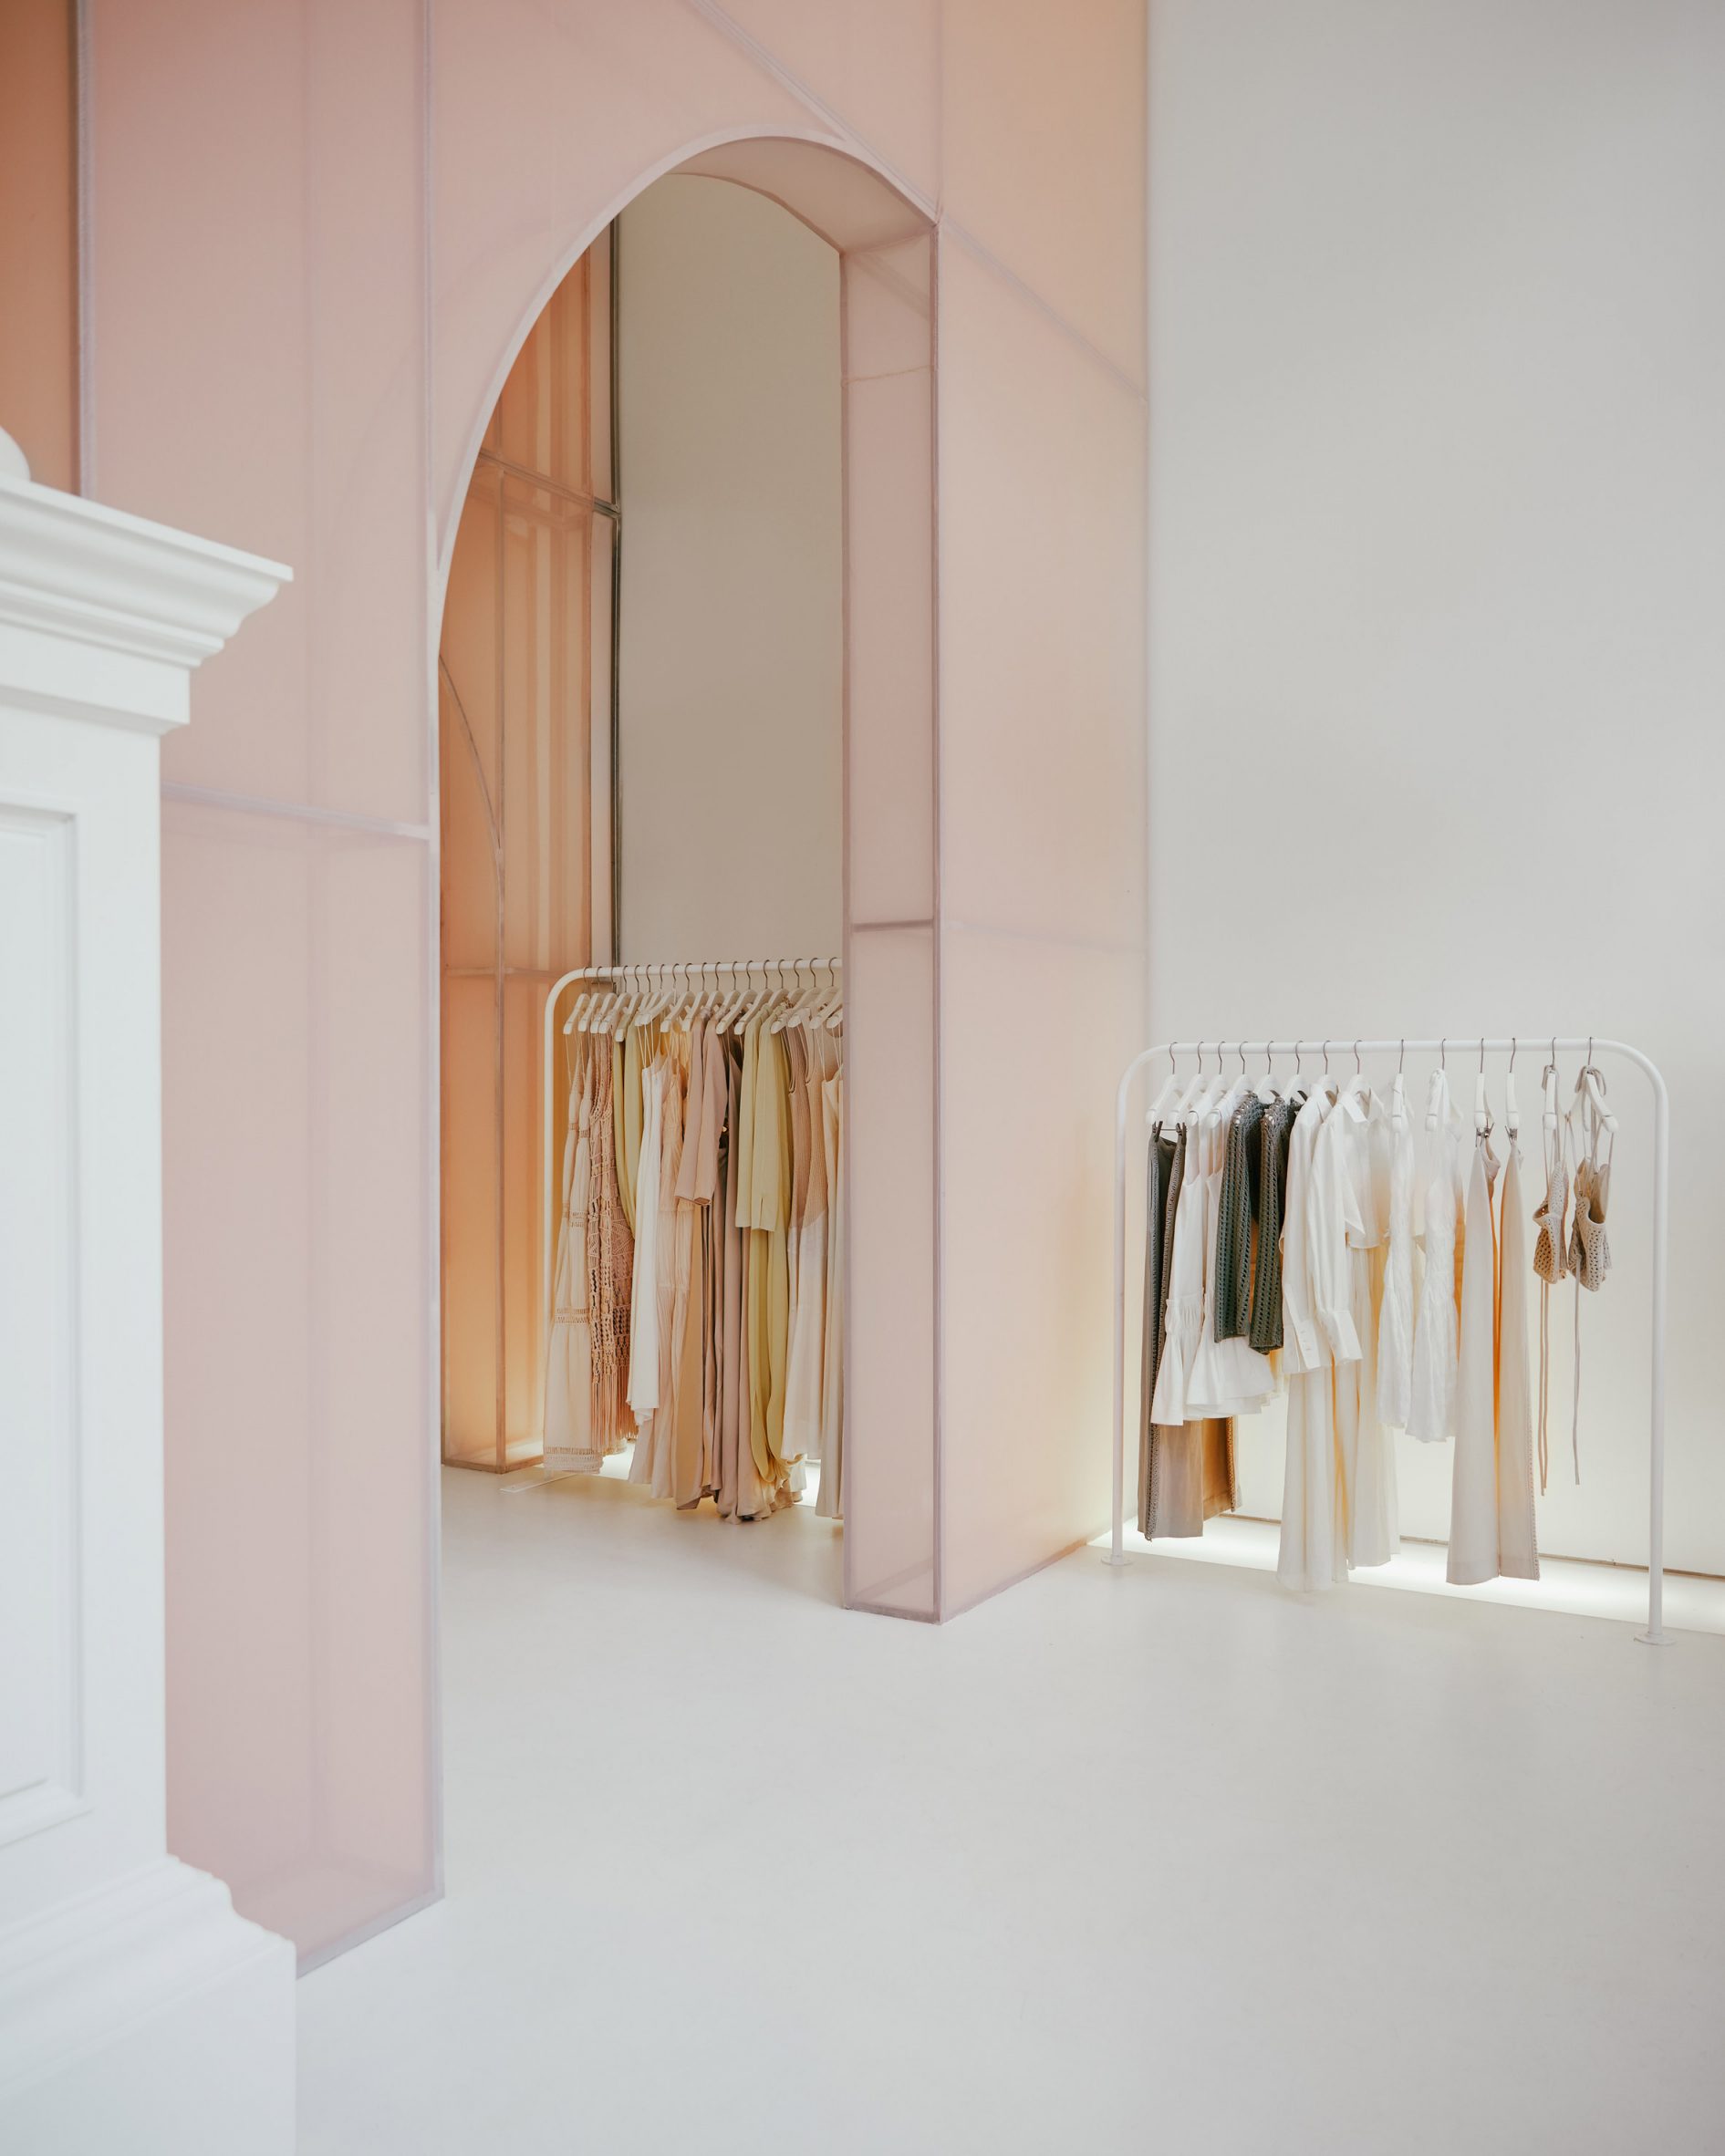 Fabric arches divide Jonathan Simkhai store in Soho by Aruliden